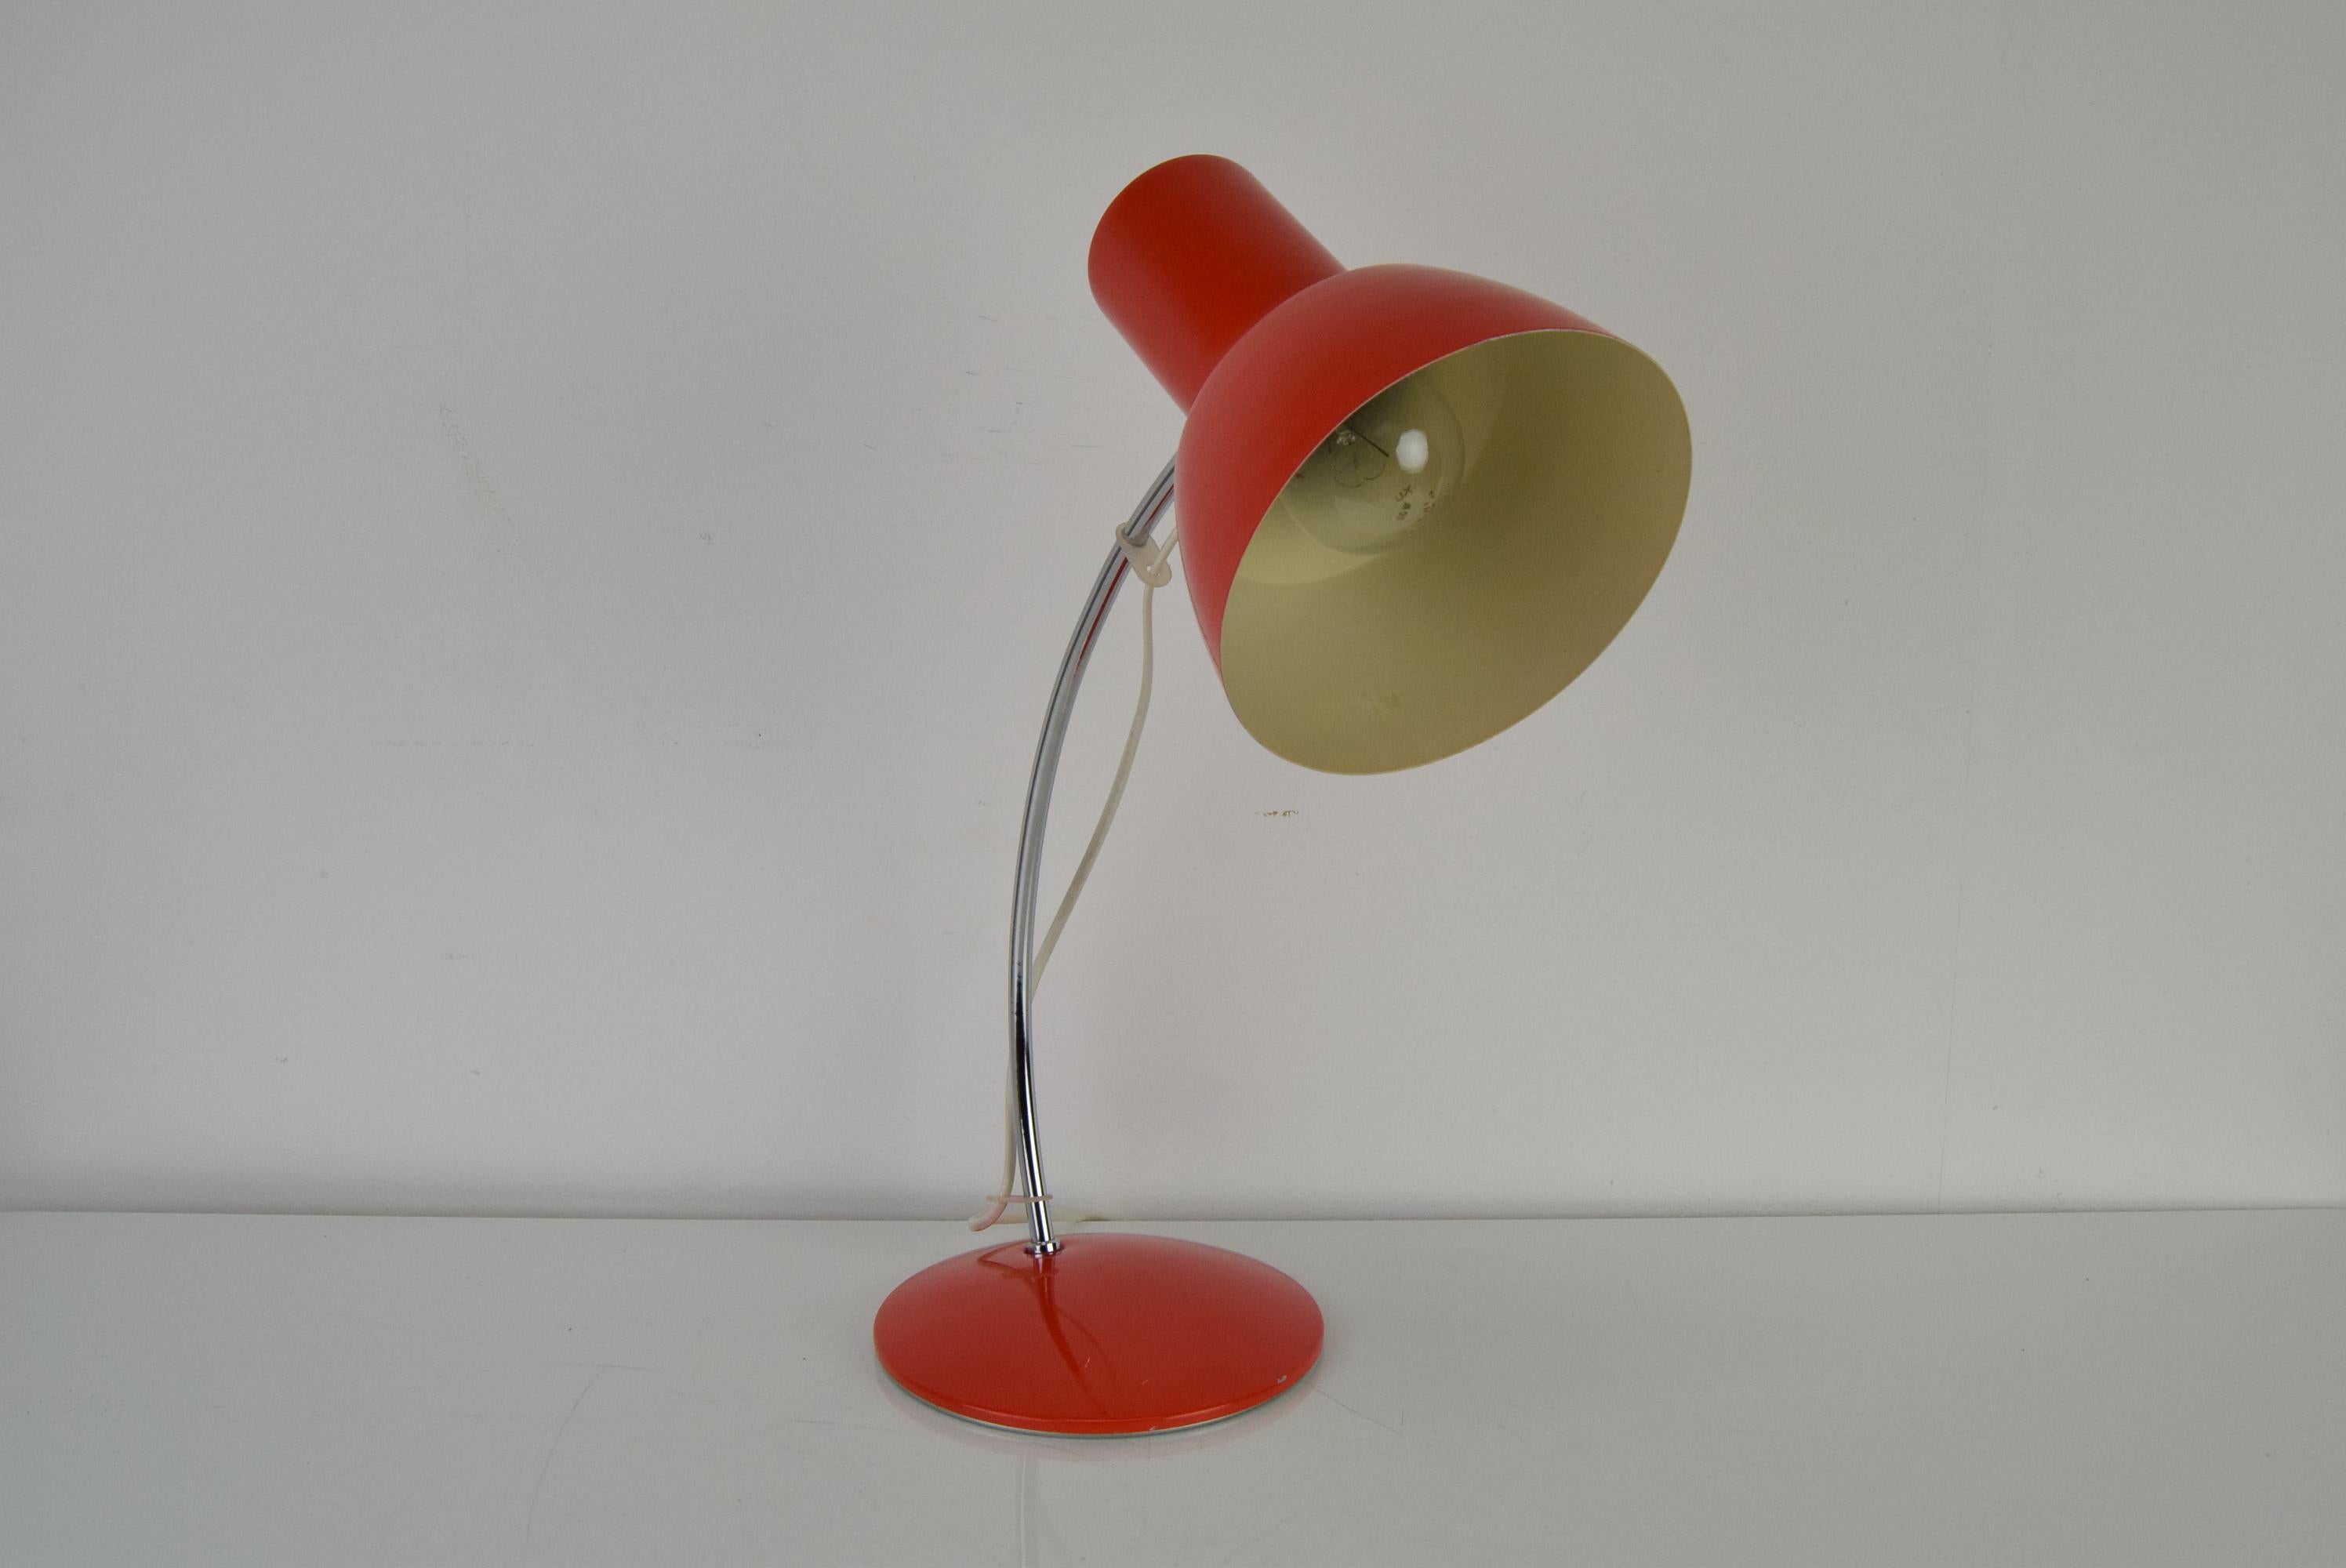 Czech Midcentury Red Table Lamp/Napako Designed by Josef Hurka, 1970s For Sale